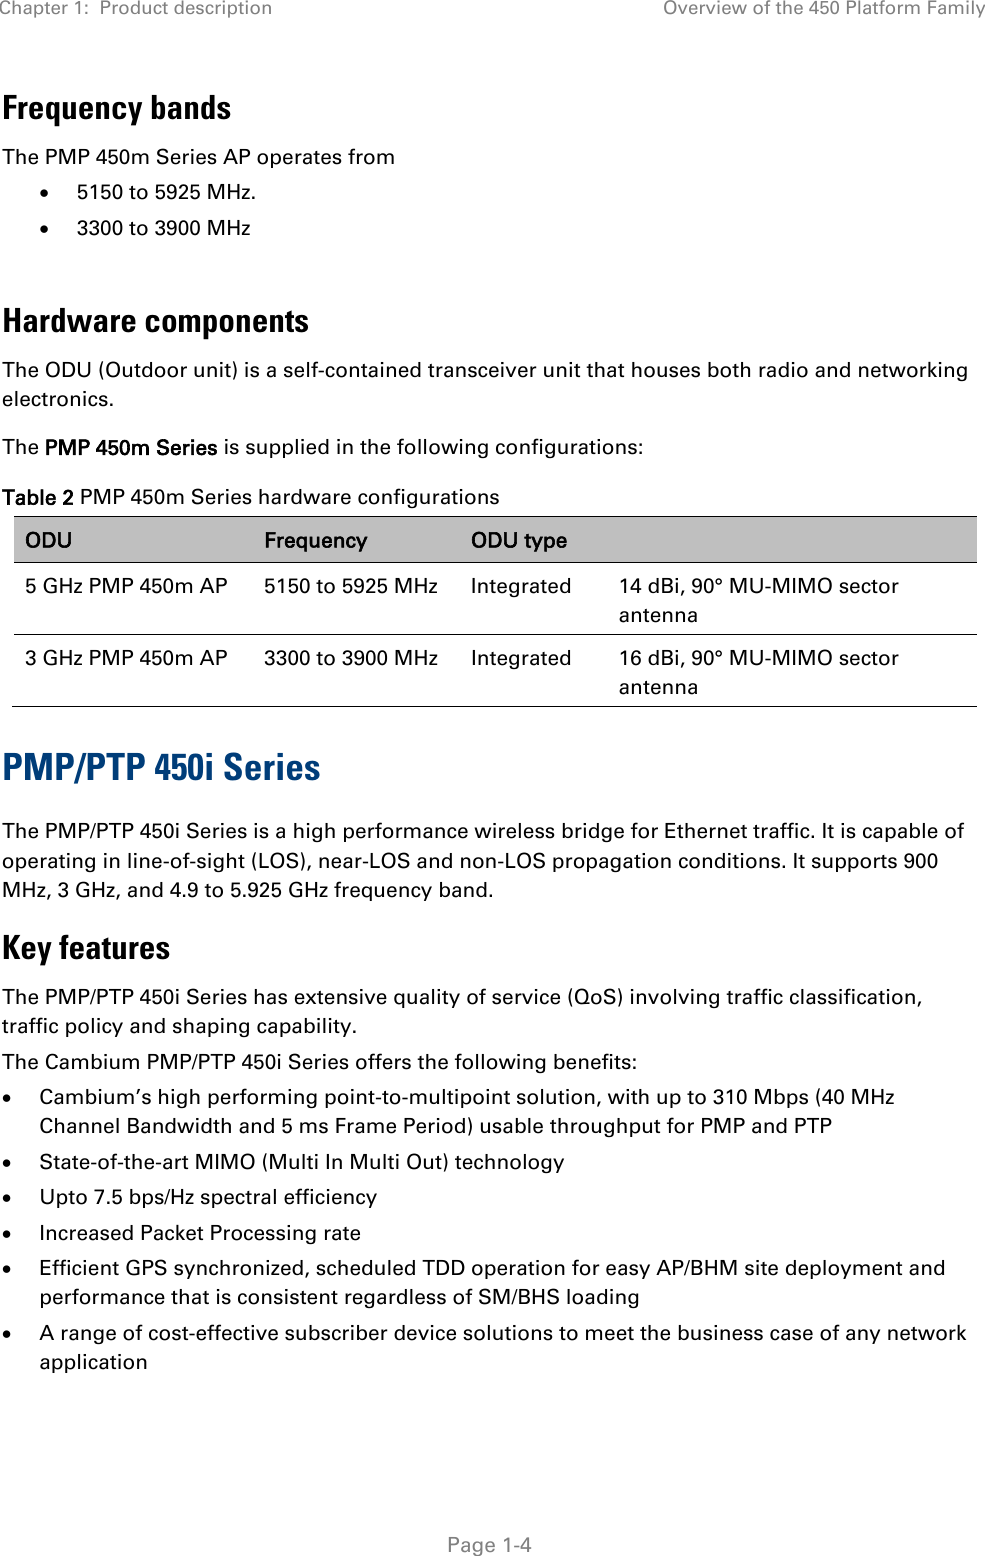 Chapter 1:  Product description Overview of the 450 Platform Family   Page 1-4 Frequency bands The PMP 450m Series AP operates from  • 5150 to 5925 MHz. • 3300 to 3900 MHz  Hardware components The ODU (Outdoor unit) is a self-contained transceiver unit that houses both radio and networking electronics.  The PMP 450m Series is supplied in the following configurations: Table 2 PMP 450m Series hardware configurations ODU Frequency ODU type  5 GHz PMP 450m AP 5150 to 5925 MHz  Integrated  14 dBi, 90° MU-MIMO sector antenna 3 GHz PMP 450m AP 3300 to 3900 MHz  Integrated  16 dBi, 90° MU-MIMO sector antenna PMP/PTP 450i Series The PMP/PTP 450i Series is a high performance wireless bridge for Ethernet traffic. It is capable of operating in line-of-sight (LOS), near-LOS and non-LOS propagation conditions. It supports 900 MHz, 3 GHz, and 4.9 to 5.925 GHz frequency band. Key features The PMP/PTP 450i Series has extensive quality of service (QoS) involving traffic classification, traffic policy and shaping capability.  The Cambium PMP/PTP 450i Series offers the following benefits: • Cambium’s high performing point-to-multipoint solution, with up to 310 Mbps (40 MHz Channel Bandwidth and 5 ms Frame Period) usable throughput for PMP and PTP • State-of-the-art MIMO (Multi In Multi Out) technology • Upto 7.5 bps/Hz spectral efficiency • Increased Packet Processing rate • Efficient GPS synchronized, scheduled TDD operation for easy AP/BHM site deployment and performance that is consistent regardless of SM/BHS loading • A range of cost-effective subscriber device solutions to meet the business case of any network application 